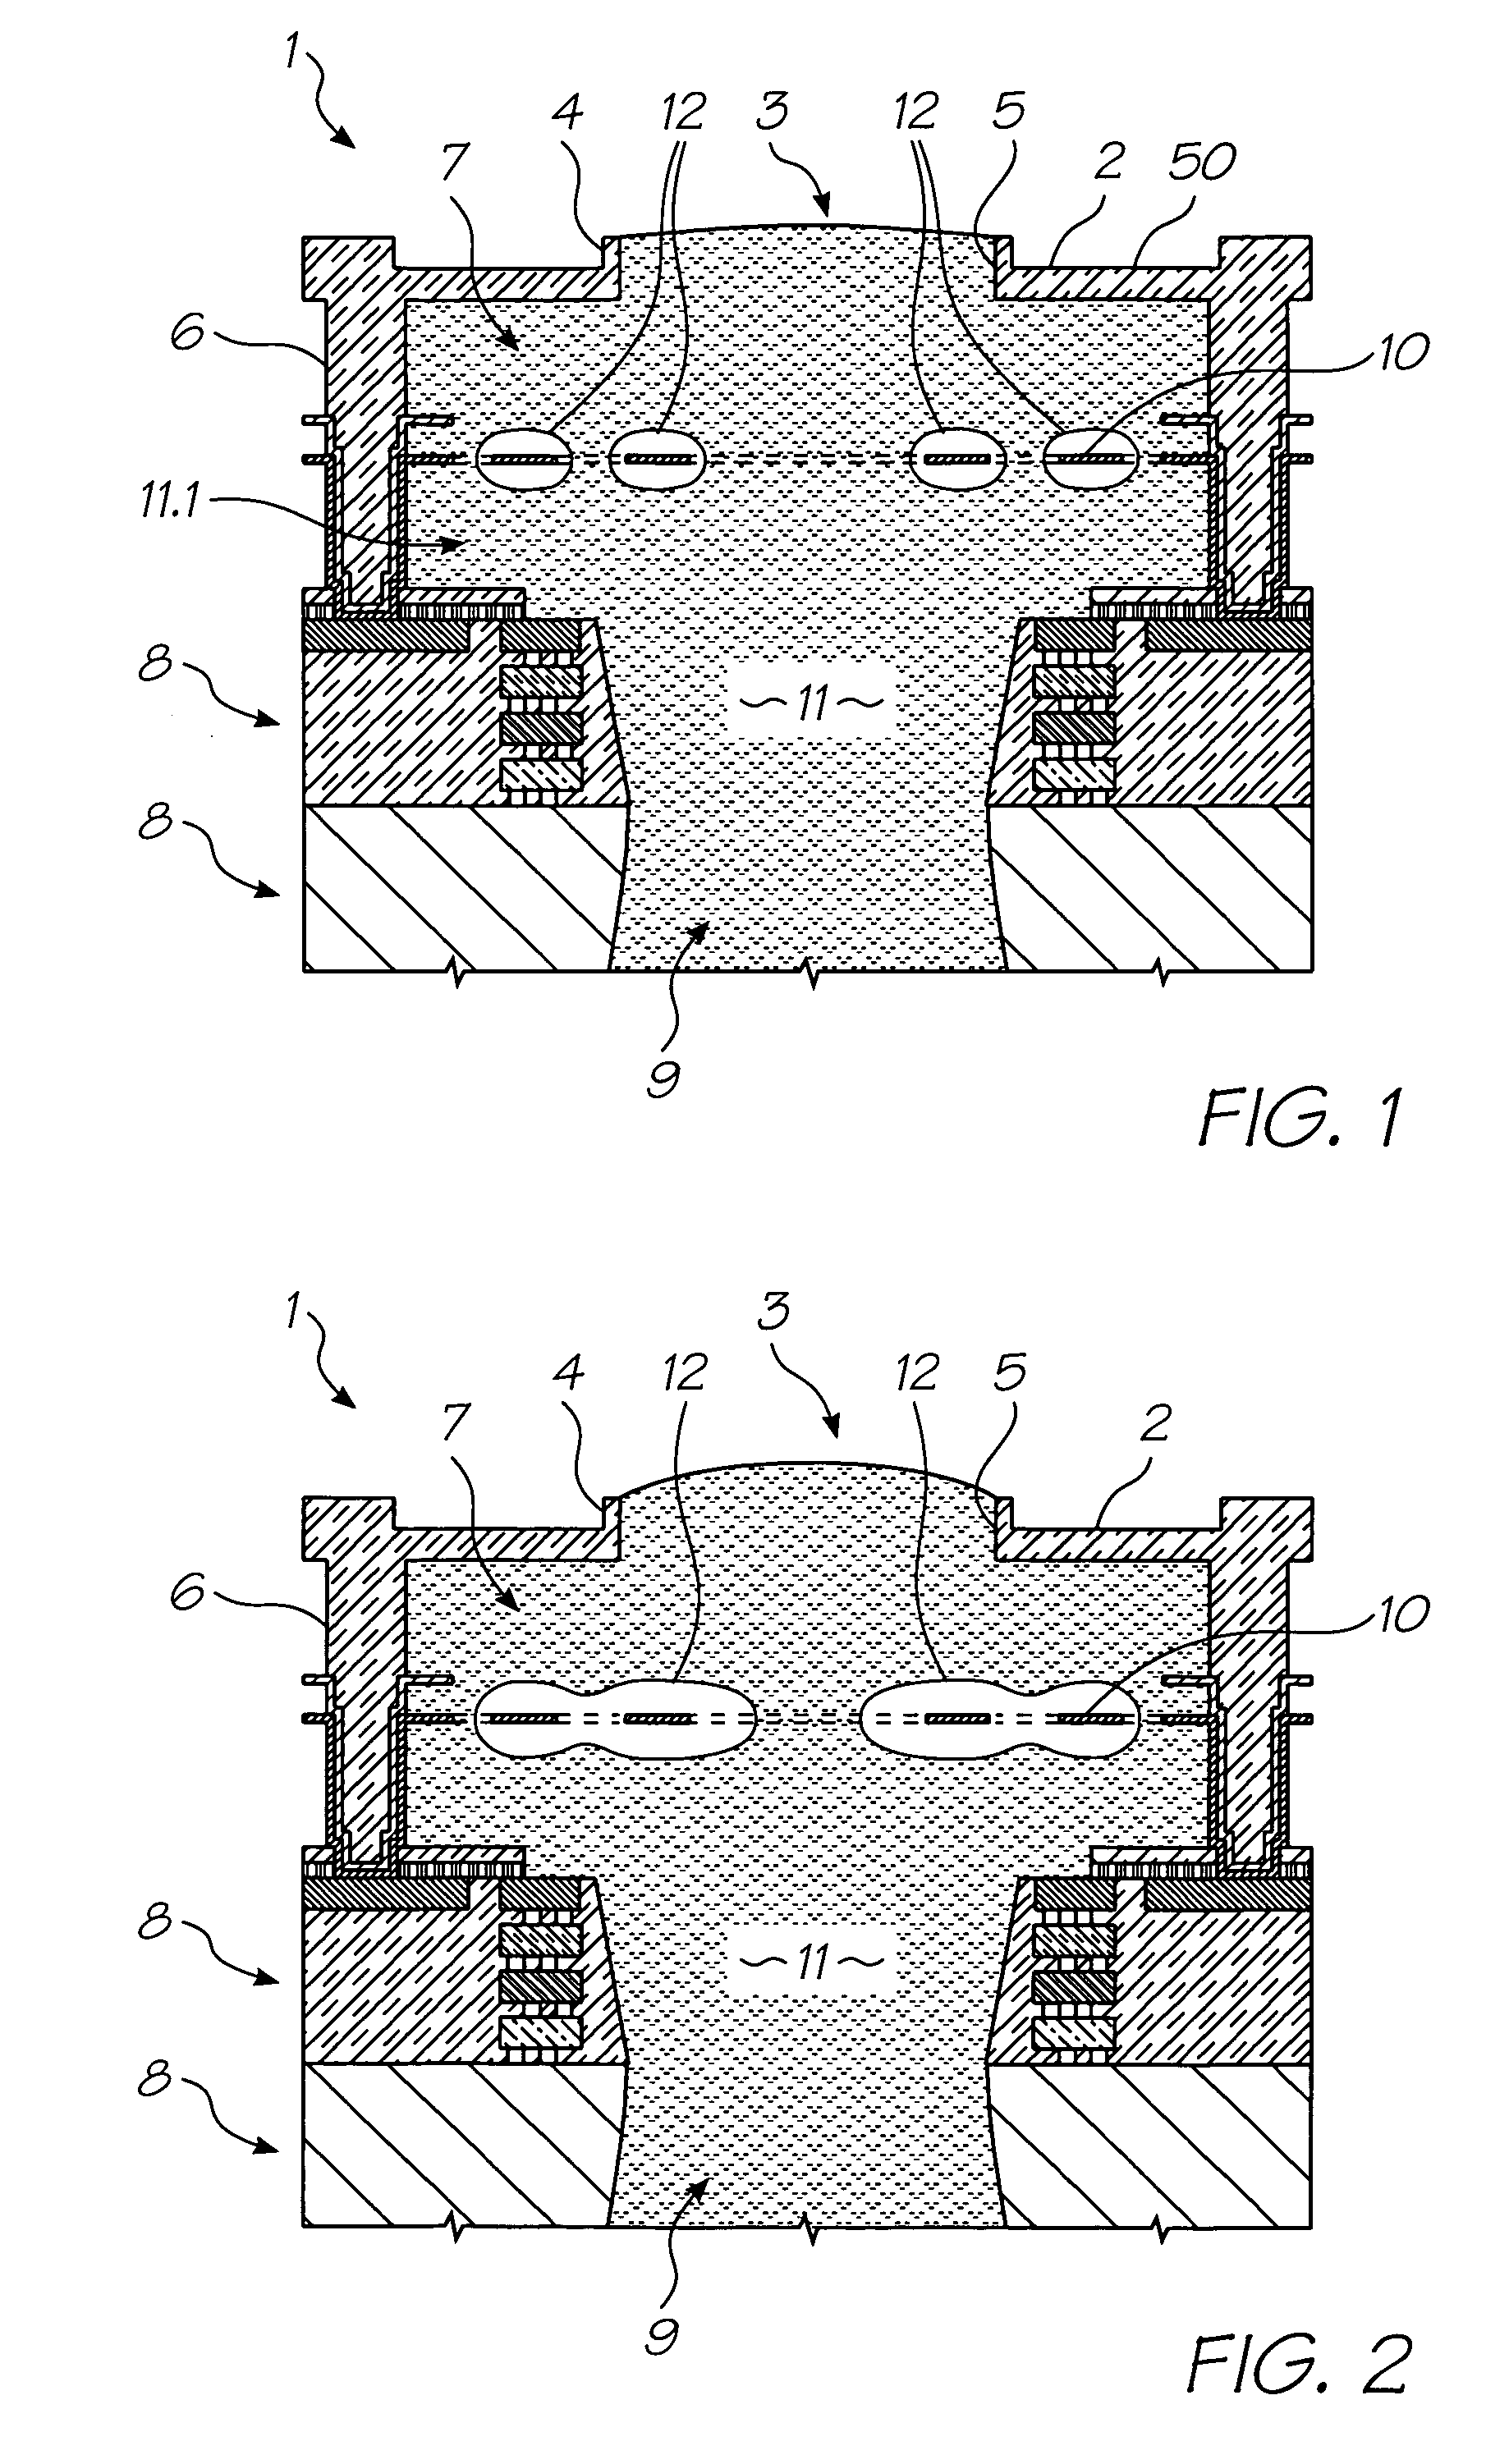 Inkjet printhead with low thermal product layer